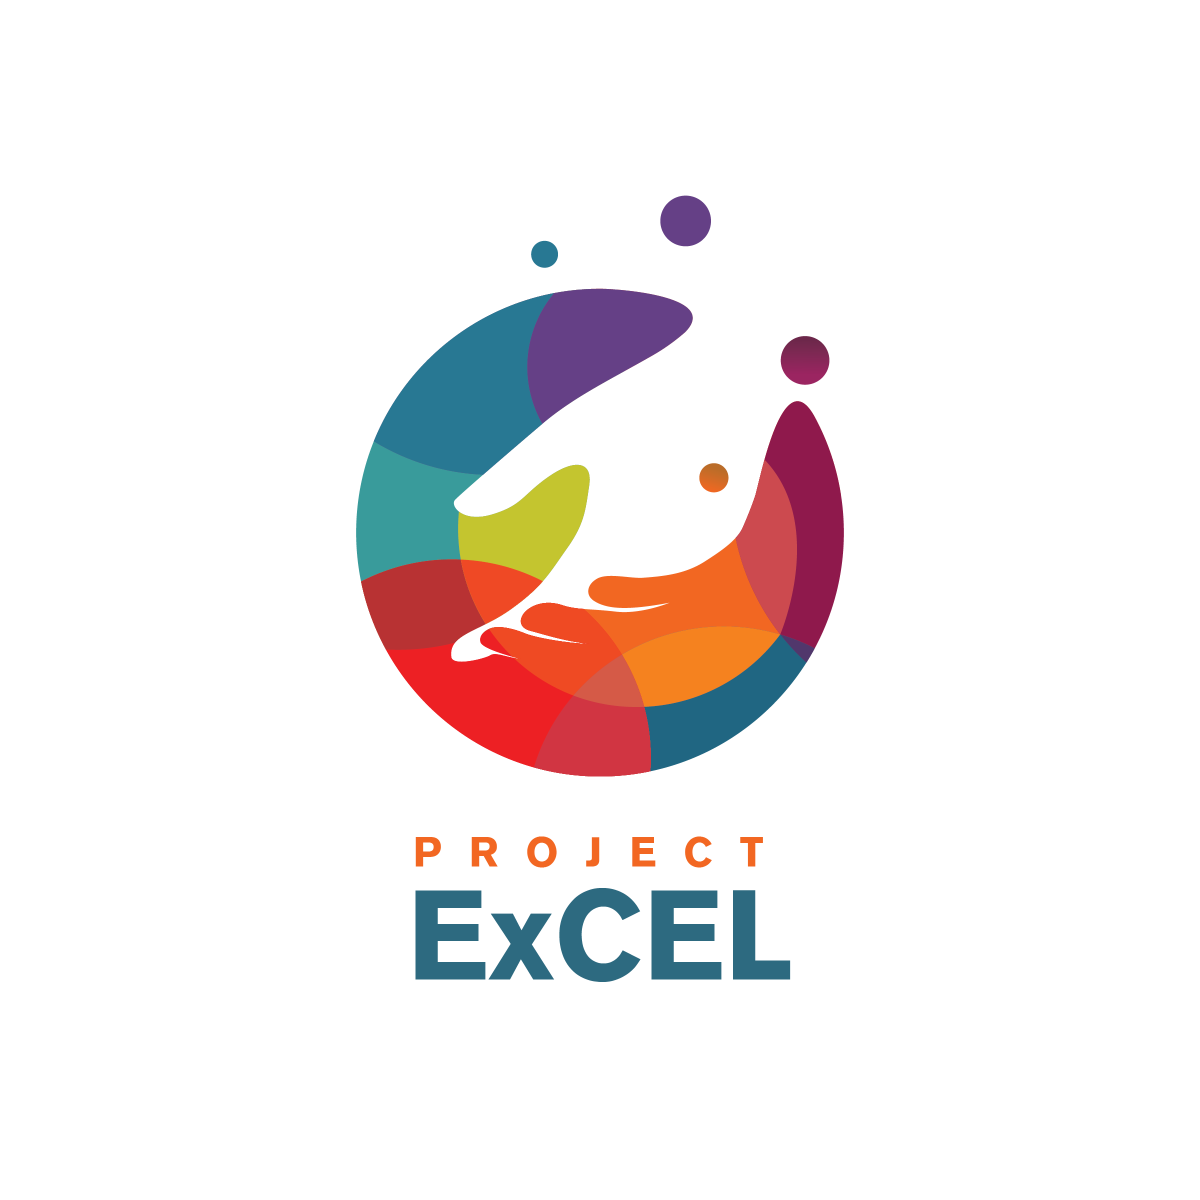 Image of the Project Excel logo, featuring a hand made of negative space amongst red, orange, green, blue, and purple overlapping circles, with the words PROJECT in orange, and ExCEL in blue.